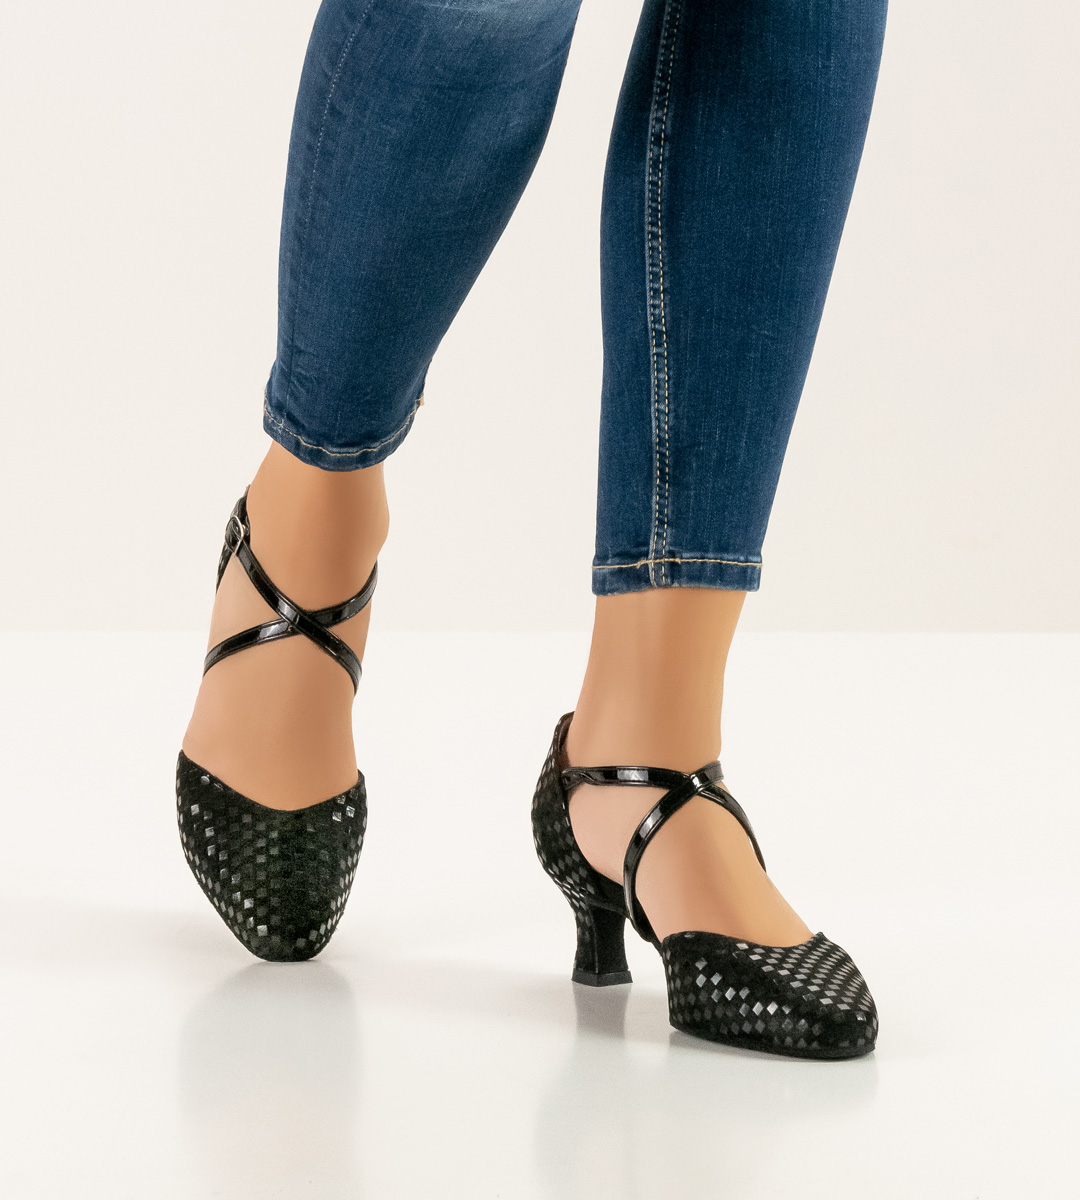 Classic Werner Kern ladies' dance shoe in black in combiantion with blue jeans